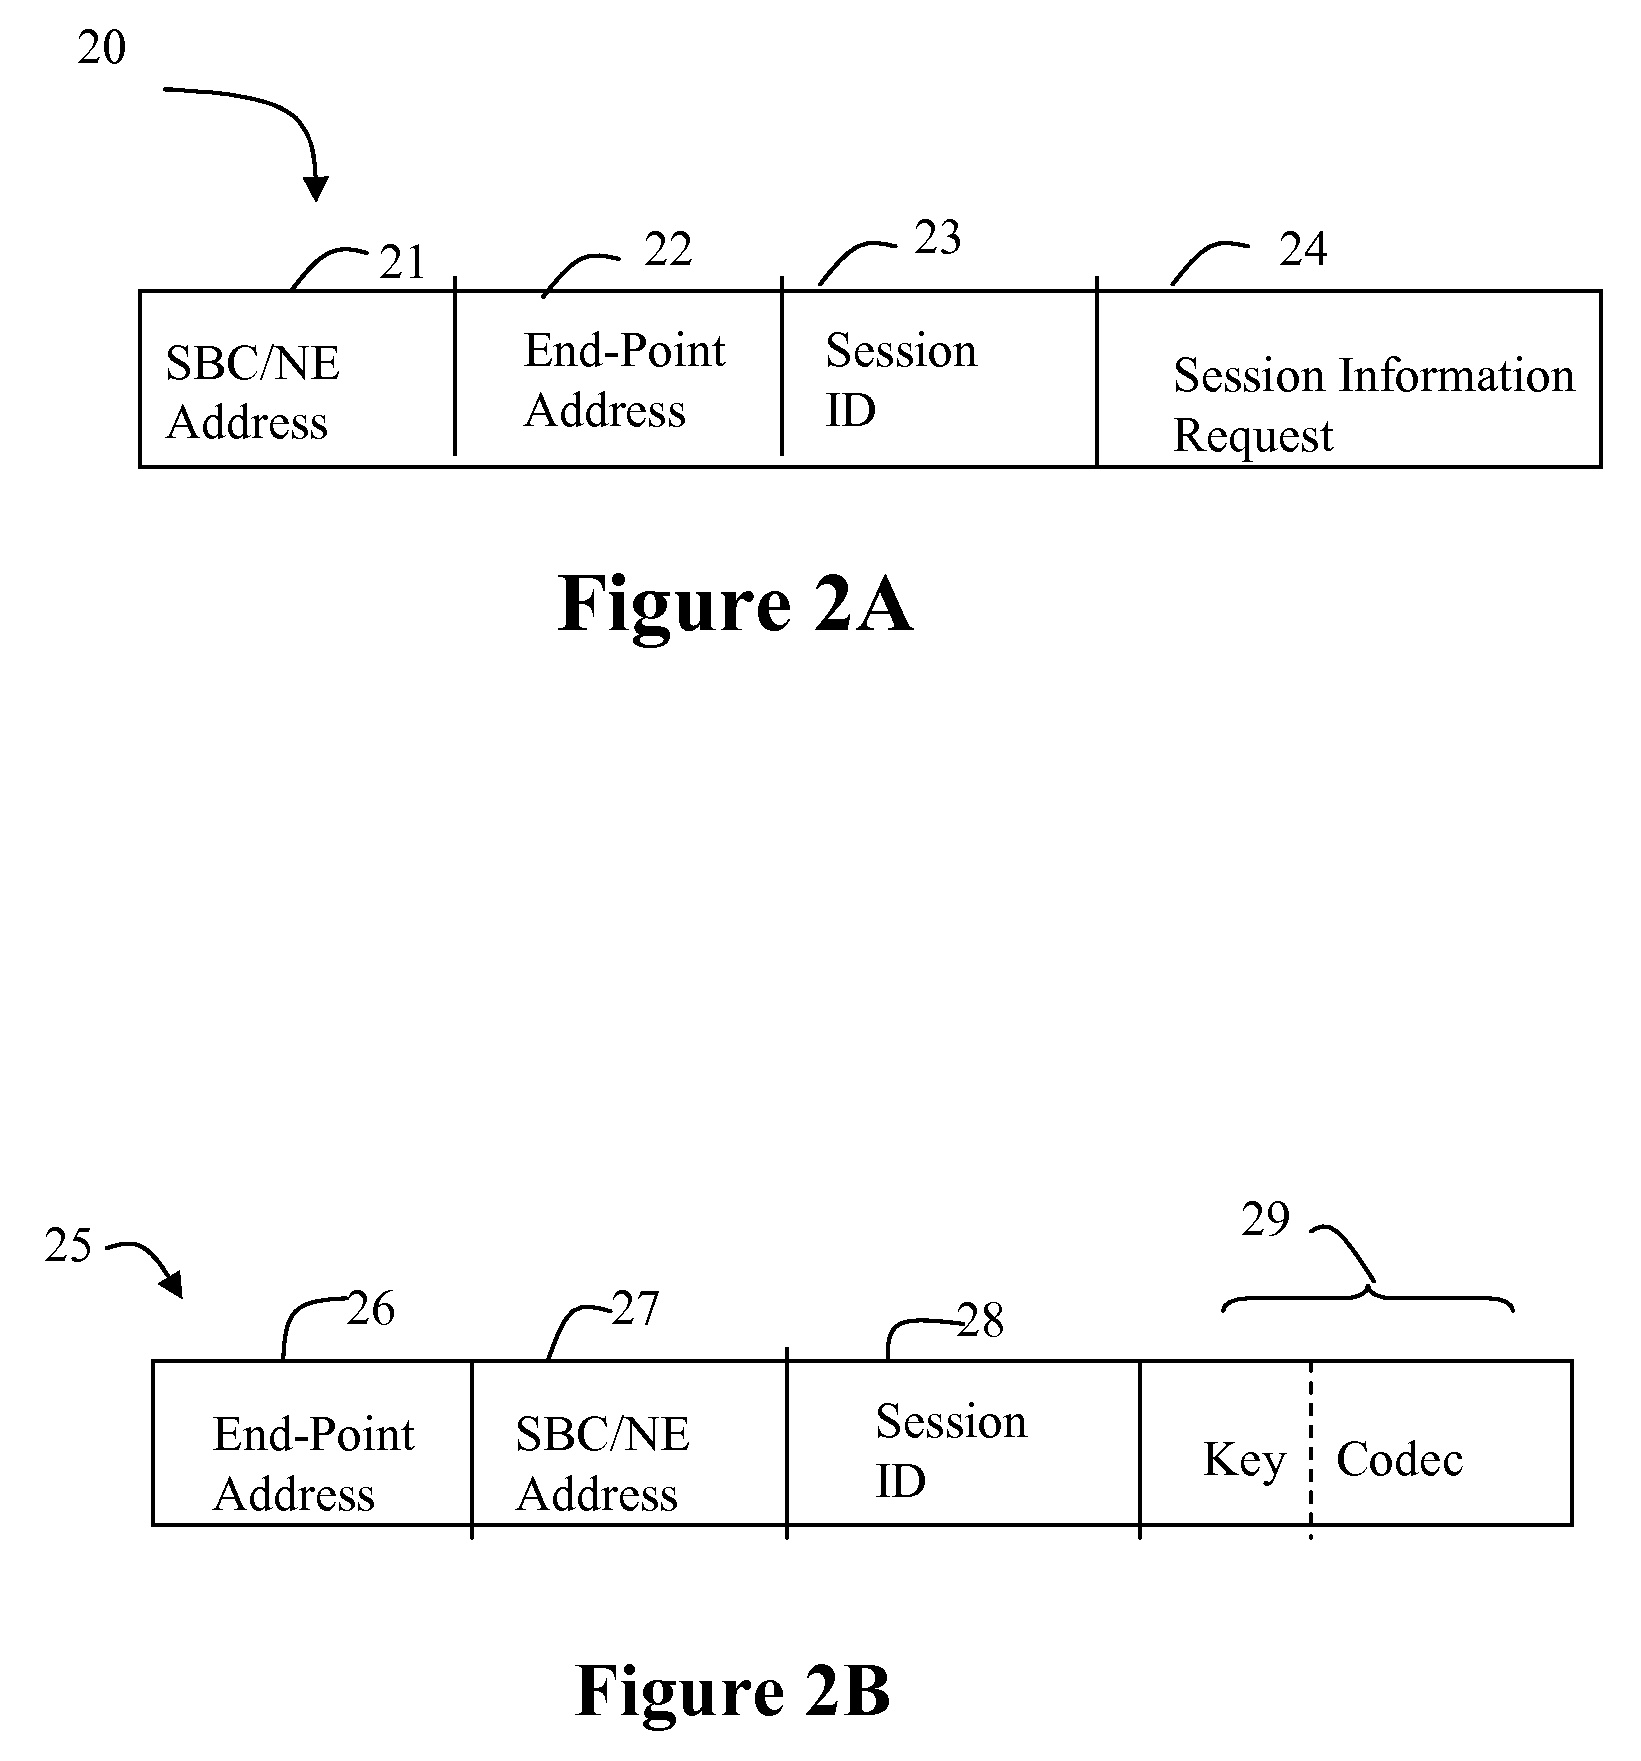 Method and Apparatus for Identifying and Monitoring VOIP Media Plane Security Keys for Service Provider Lawful Intercept Use